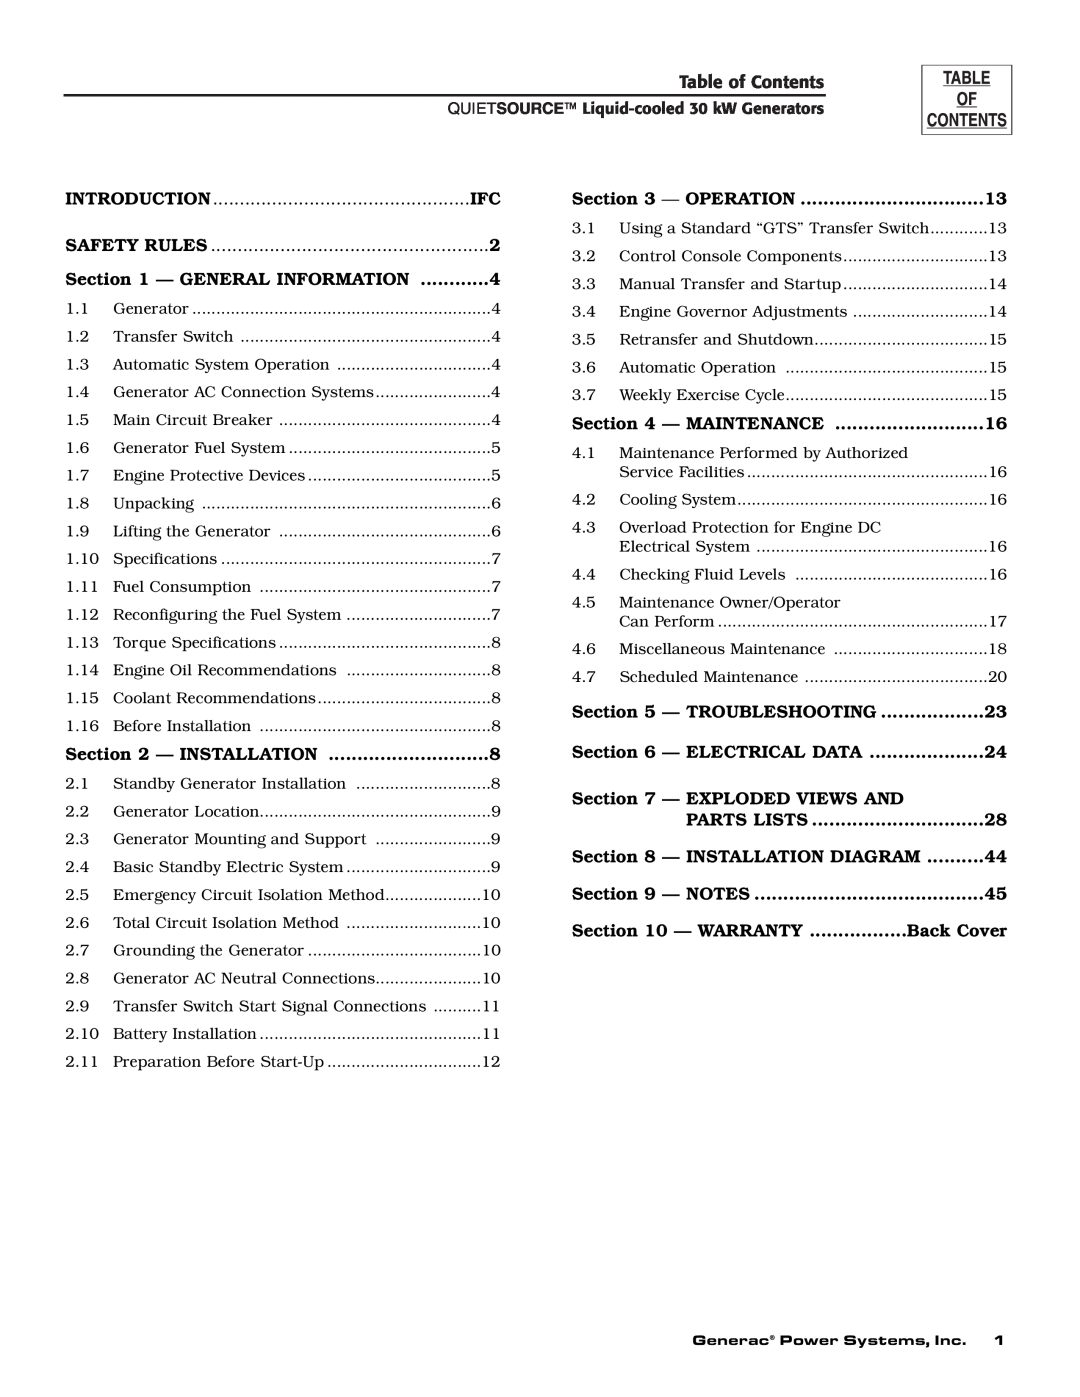 Generac Power Systems 004917-3 owner manual Table of Contents, Introduction 